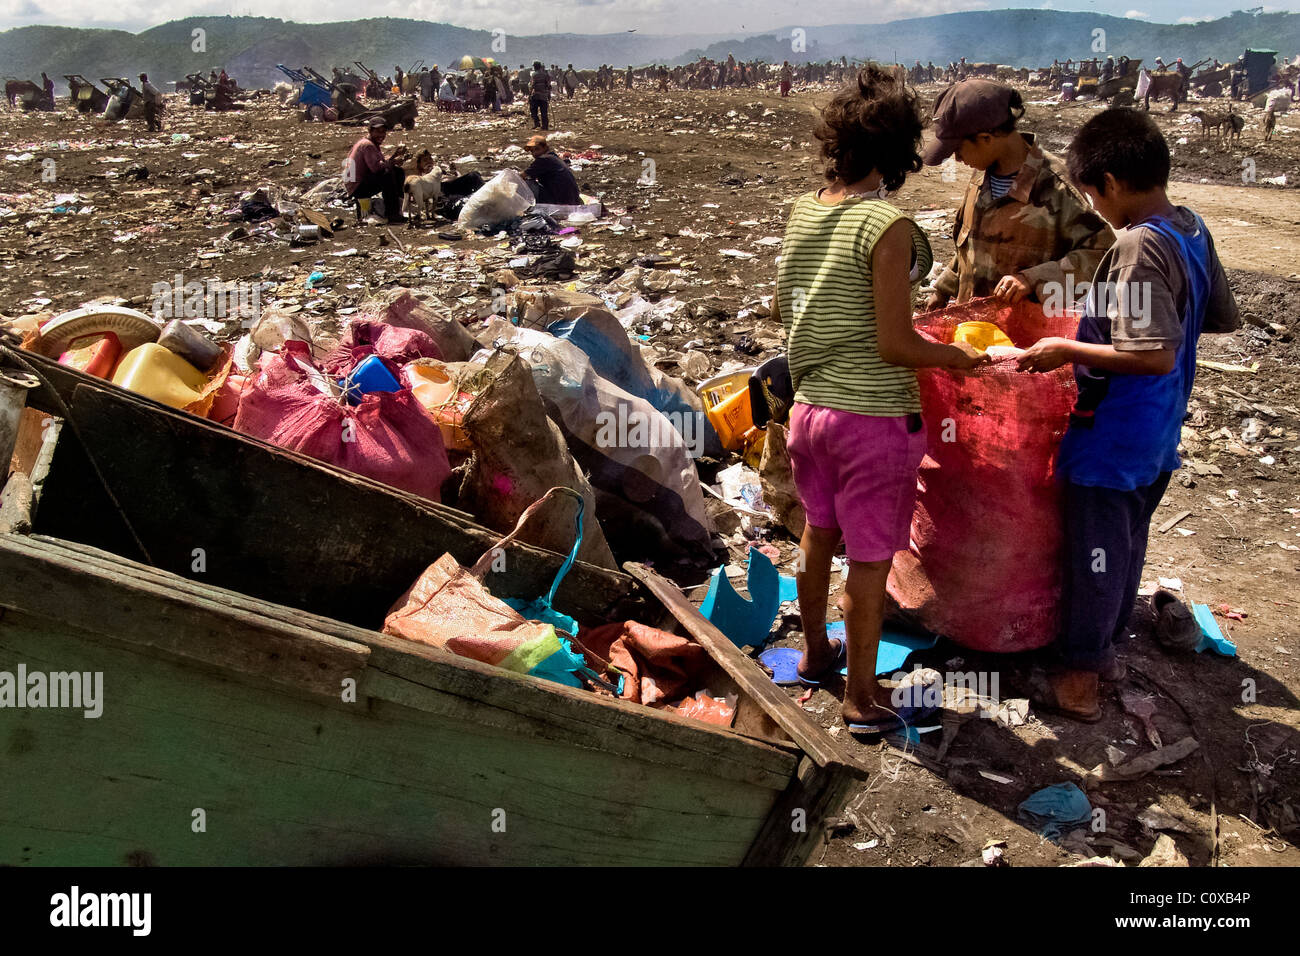 A Nicaraguan family members recollect plastic garbage for recycling in the garbage dump La Chureca, Managua, Nicaragua. Stock Photo